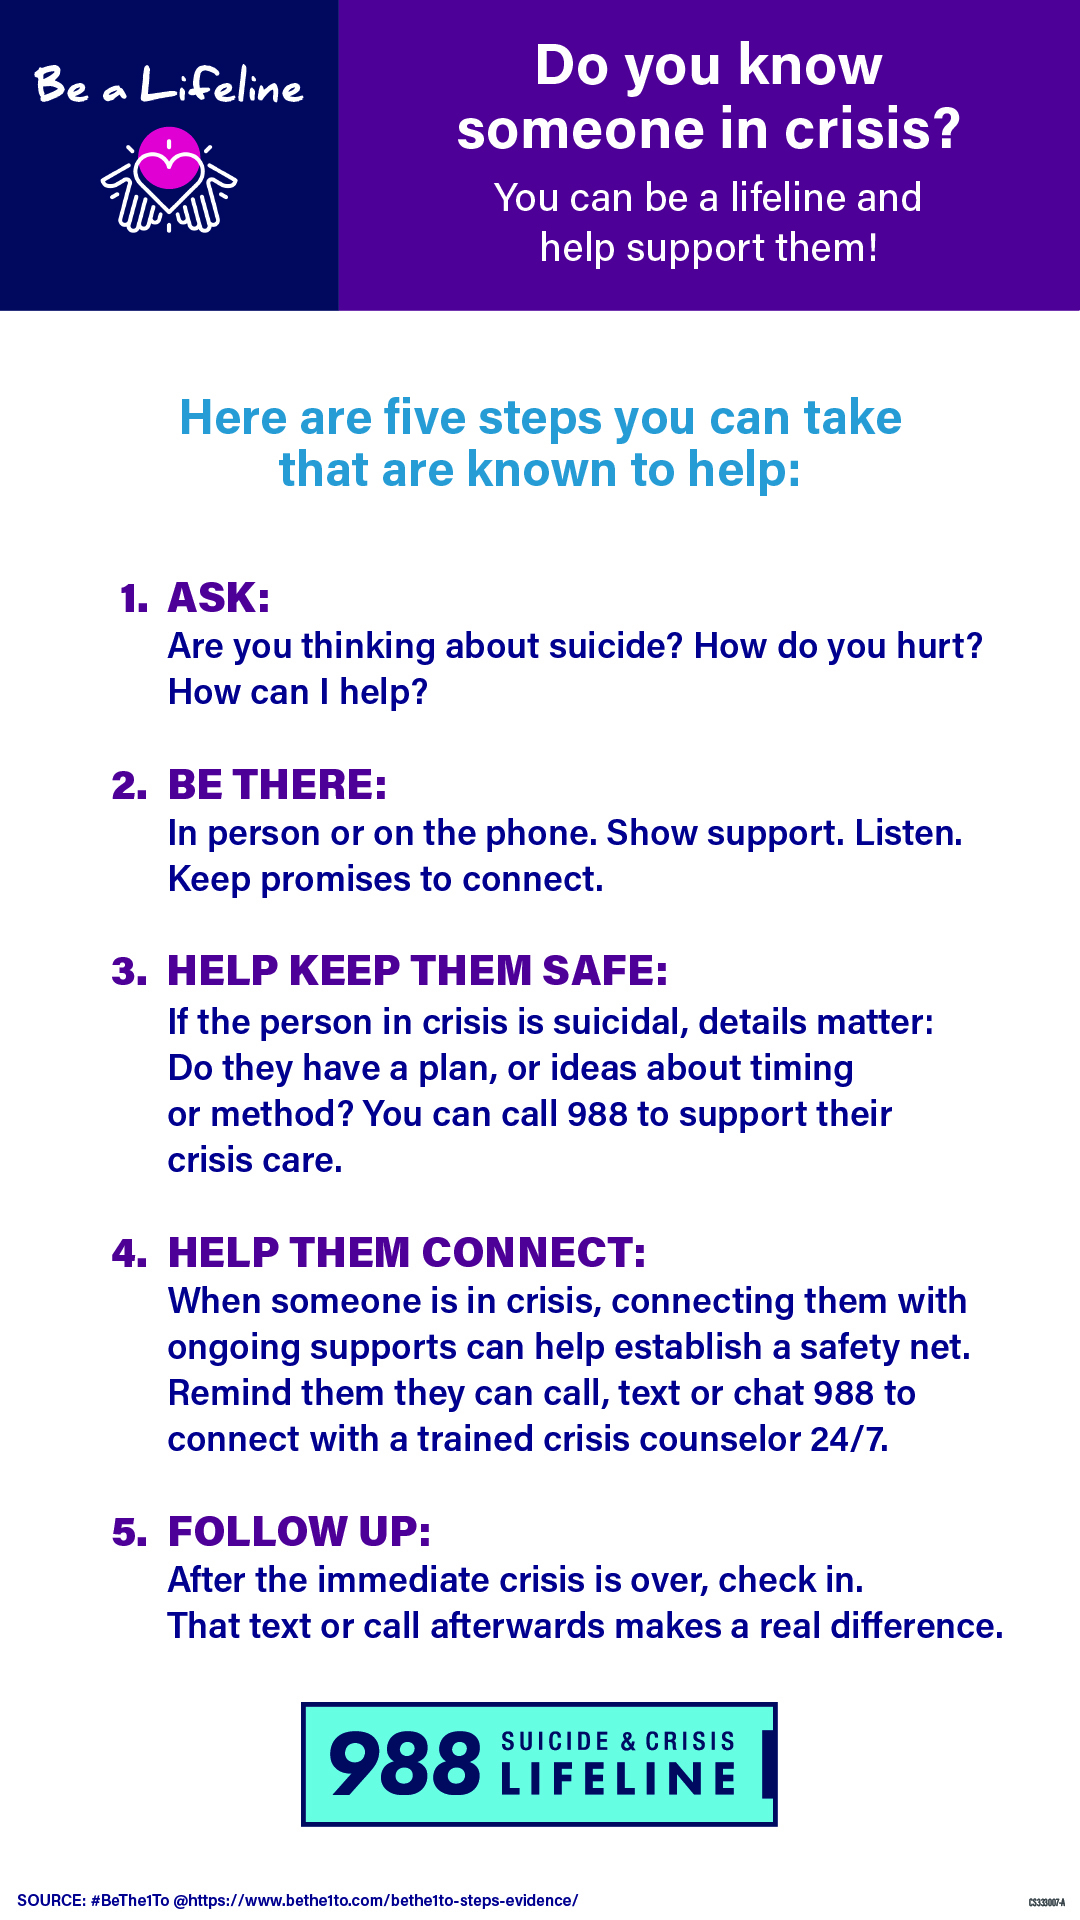 raphic with an image of open hands with a heart between them, and text that reads, there is hope; the 988 Suicide & Crisis Lifeline logo; and a list of steps to help someone in crisis. Details of the graphic are: Do you know someone in crisis? You can be a lifeline and help support them. Here are five steps you can take that are known to help:  Ask: Are you thinking about suicide? How do you hurt? How can I help? Be there: In person or on the phone. Show support. Listen. Keep promises to connect. Help keep them safe: if the person in crisis is suicidal, details matter; do they have a plan, or ideas about timing or method? You can call 988 to support their crisis care. Help them connect: When someone is in crisis, connecting them with ongoing supports can help establish a safety net. Remind them they can call, text, or chat 988 to connect with a trained crisis counselor 24/7. Follow up: After the immediate crisis is over, check in. That text or call afterwards makes a real difference. Graphic with an image of open hands with a heart between them, and text that reads, there is hope; the 988 Suicide  & Crisis Lifeline logo; and a list of steps to help someone in crisis.    Details of the graphic are: Do you know someone in crisis? You can be a lifeline and help support them. Here are five steps you can take that are known to help: 1.	Ask: Are you thinking about suicide? How do you hurt? How can I help? 2.	Be there: In person or on the phone. Show support. Listen. Keep promises to connect. 3.	Help keep them safe: if the person in crisis is suicidal, details matter; do they have a plan, or ideas about timing or method? You can call 988 to support their crisis care. 4.	Help them connect: When someone is in crisis, connecting them with ongoing supports can help establish a safety net. Remind them they can call, text, or chat 988 to connect with a trained crisis counselor 24/7. 5.	Follow up: After the immediate crisis is over, check in. That text or call afterwards makes a real difference.   Download and share Be a Lifeline - Vertical (9:16) (JPG | 1.7 MB)